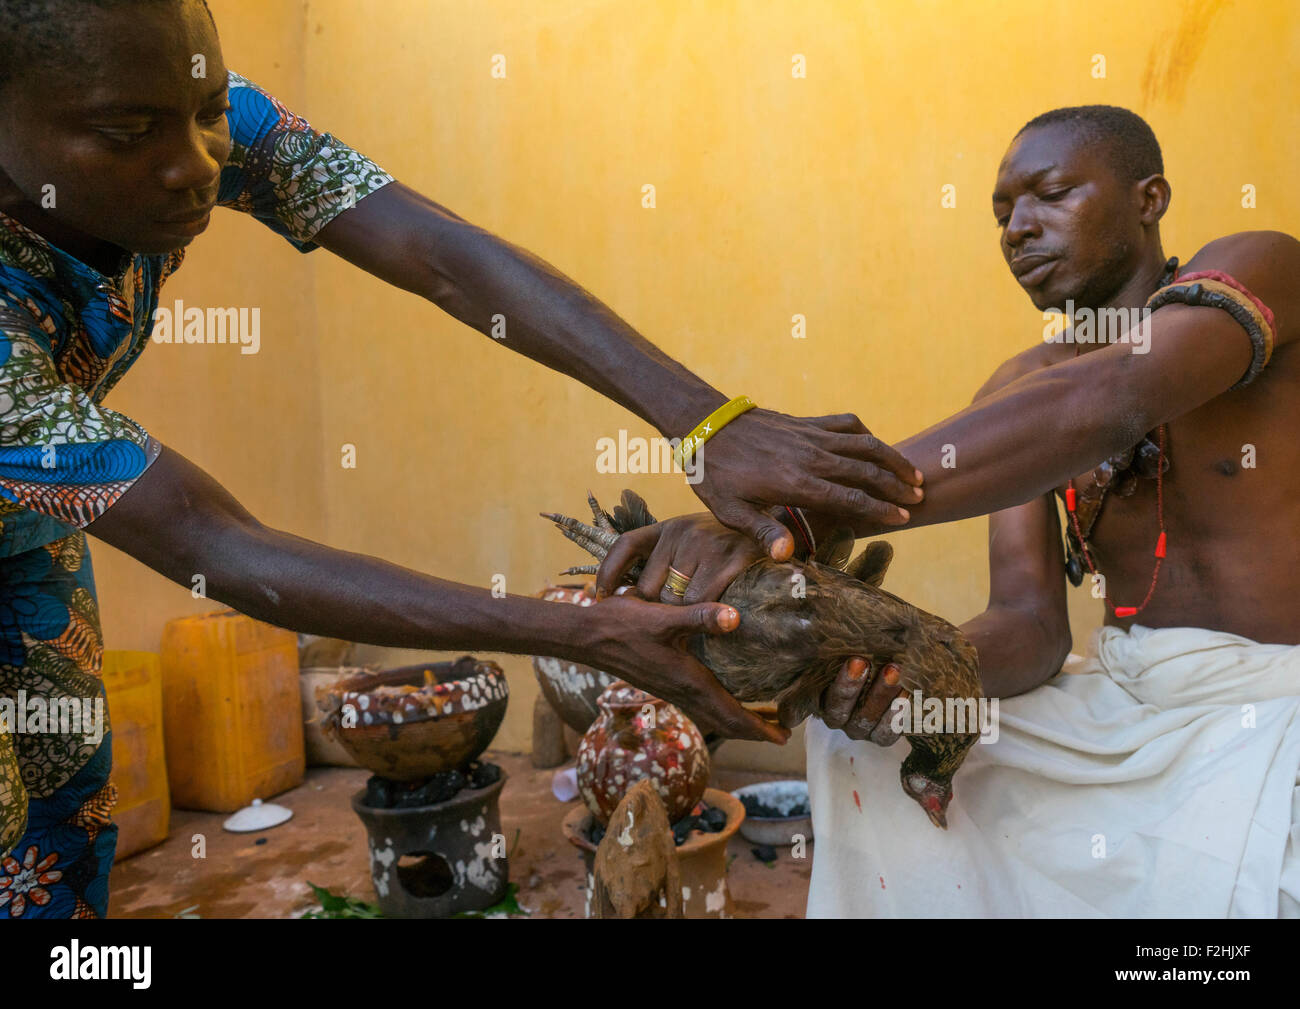 Benin, West Africa, Bonhicon, the slaughter of a pigeon in a ritual sacrifice during a voodoo ceremony runned by kagbanon bebe priest Stock Photo